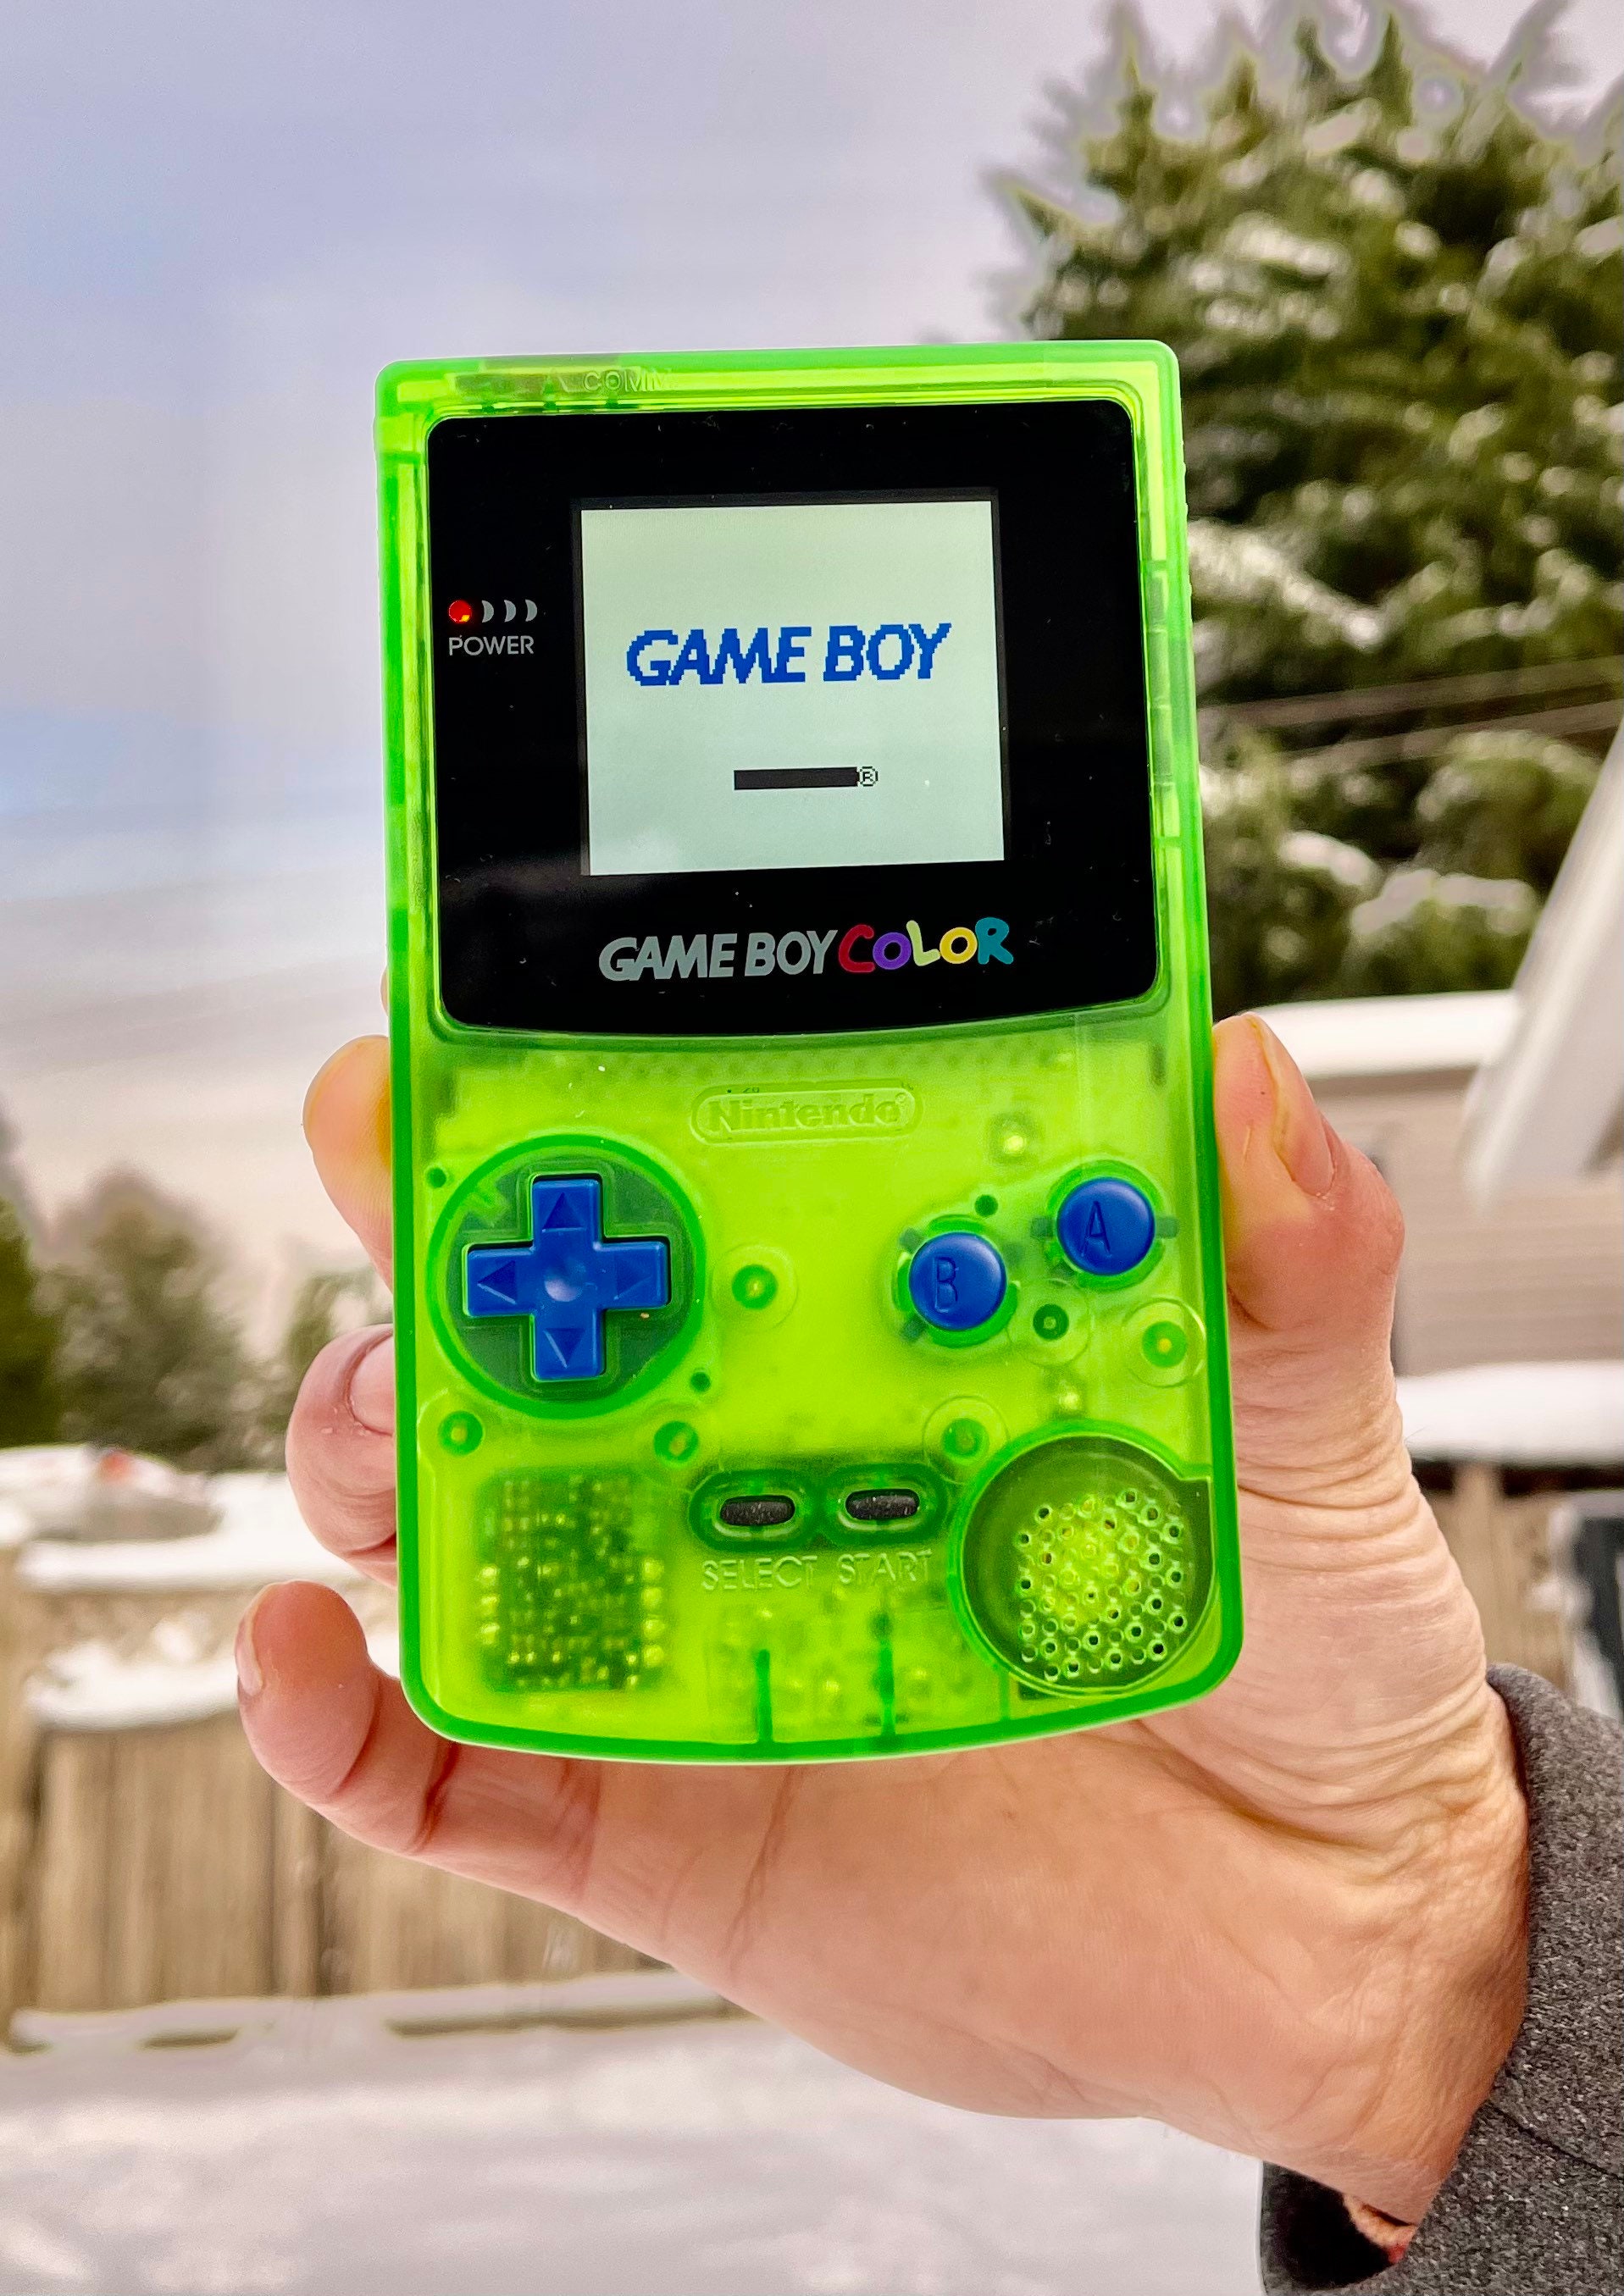 Nintendo Gameboy Color GBC TFT Backlight Clear Green Custom Modded Console  With 8 Color Pallets to Play on & 10 Levelbrightness Adjustment -   Norway